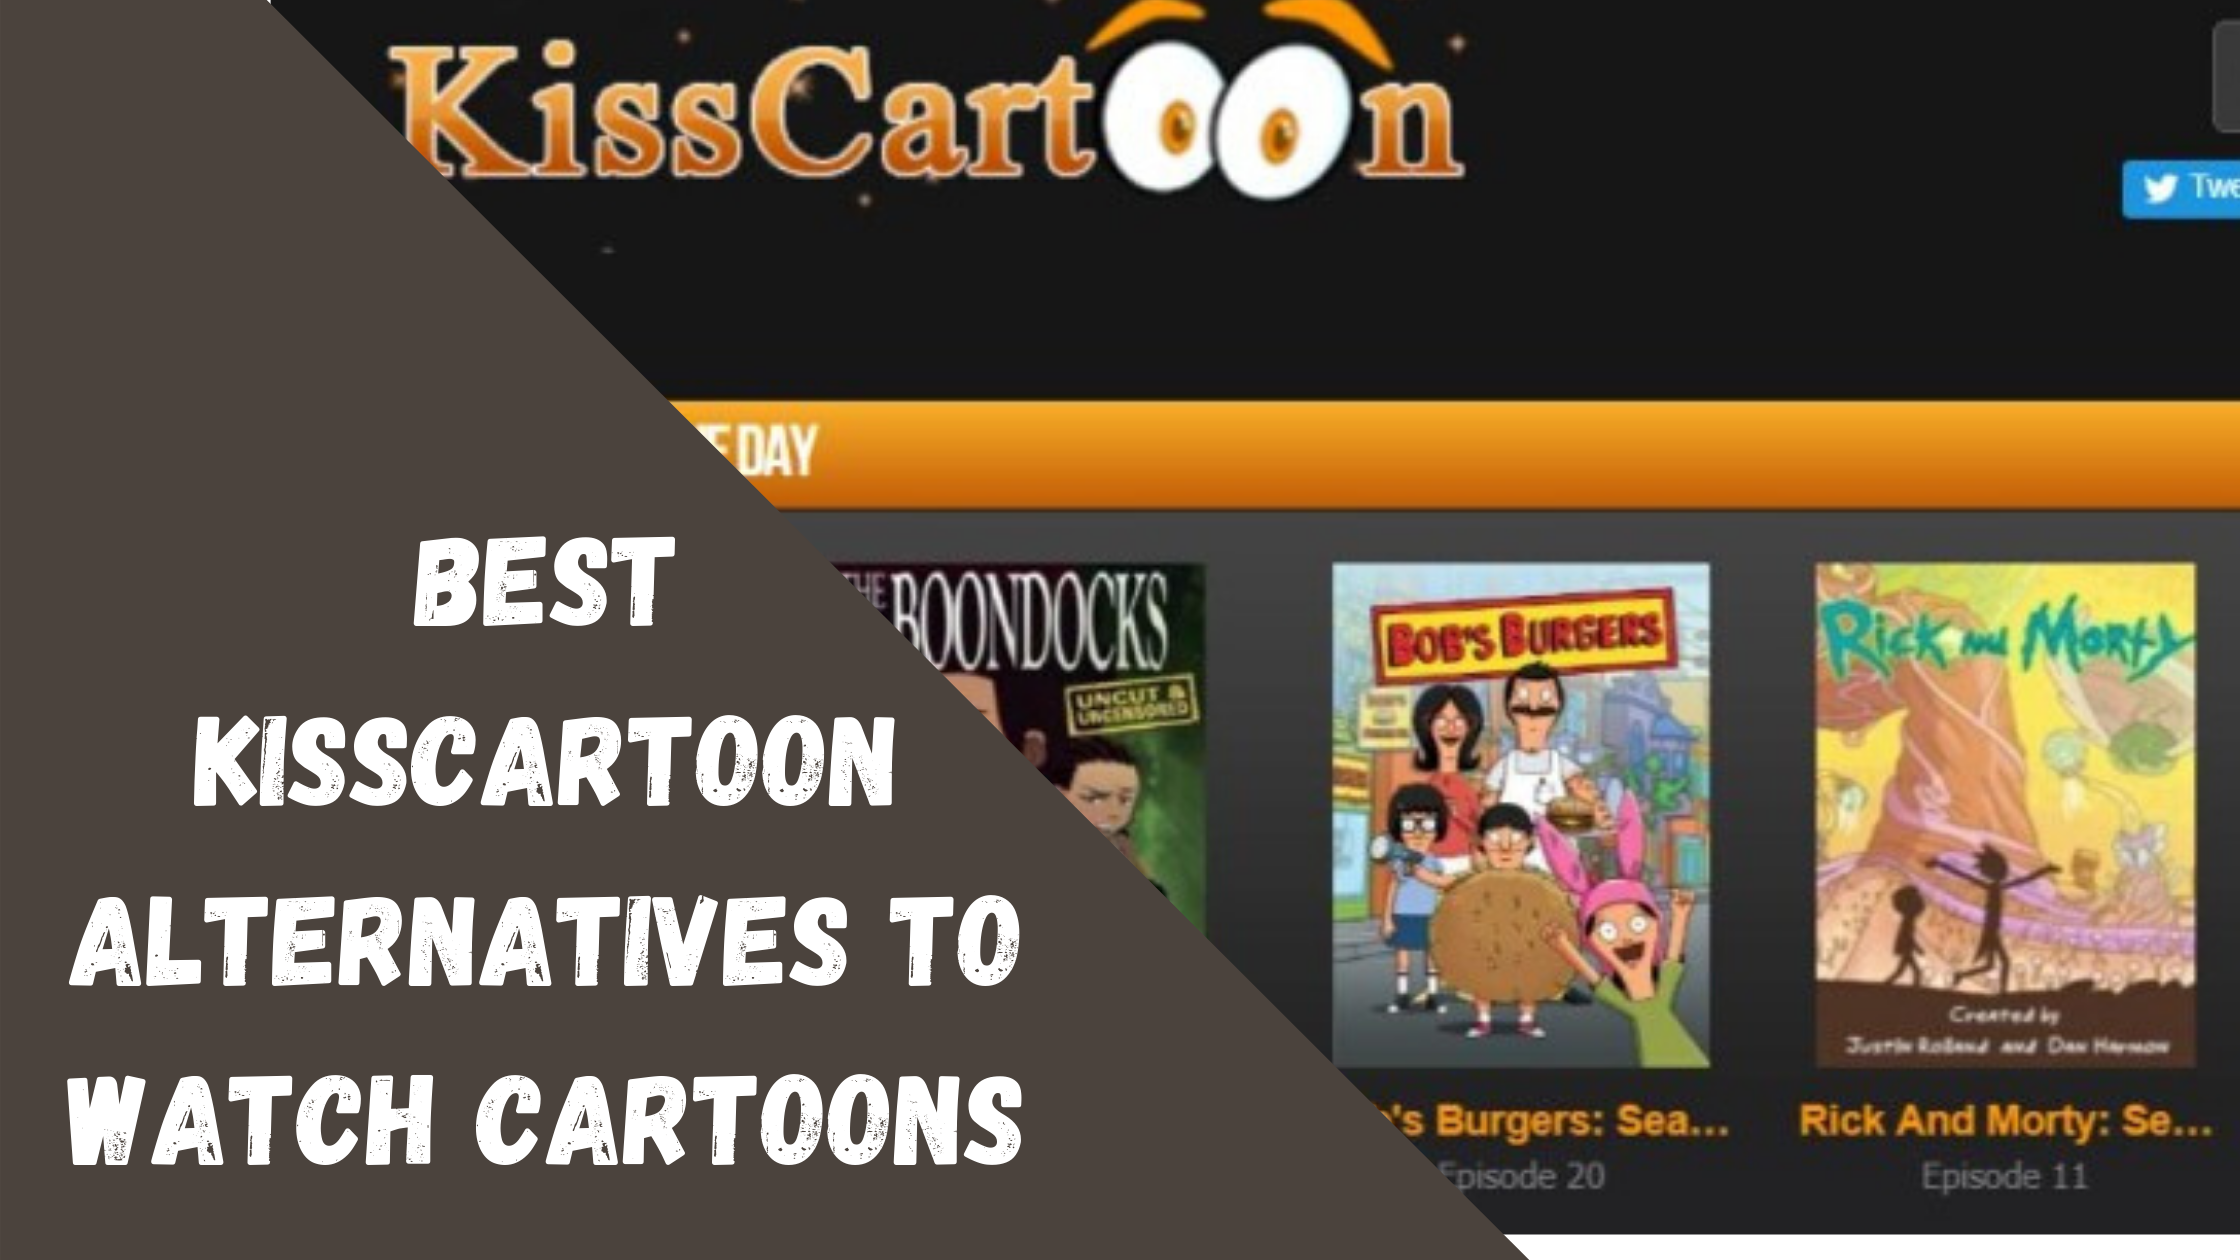 Kisscartoon for Watching Rick and Morty